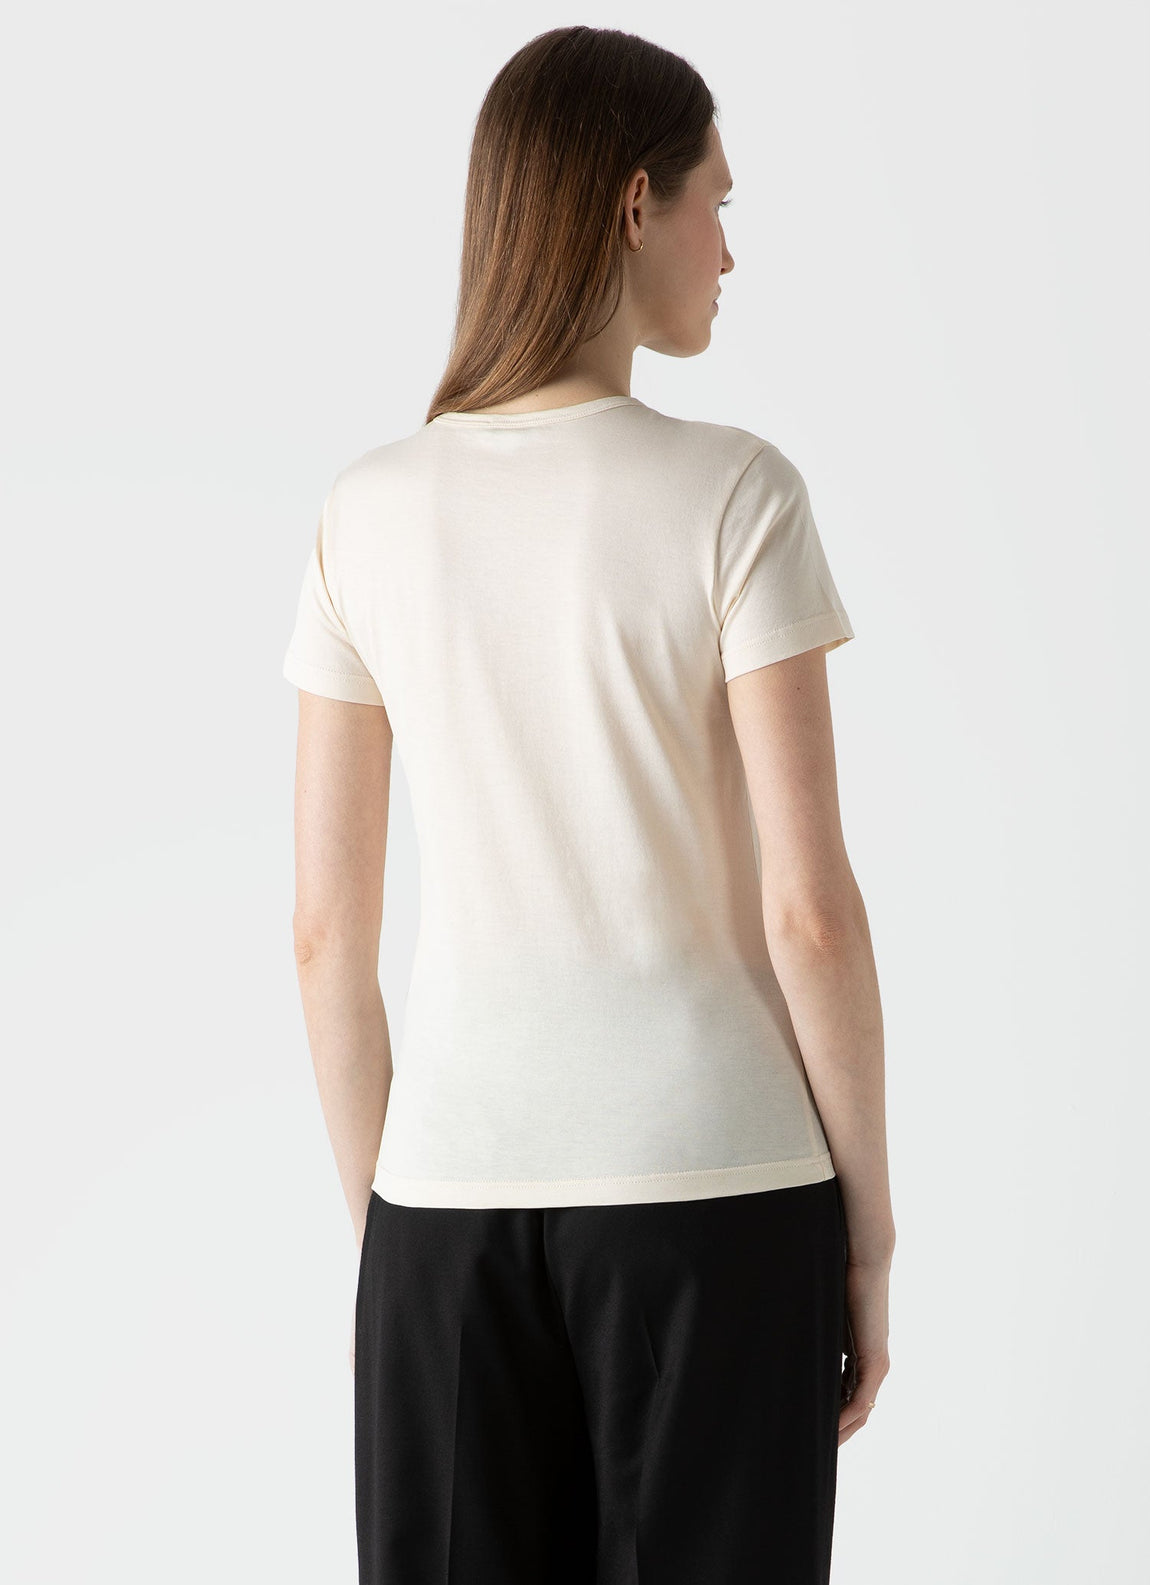 Women's Classic T-shirt in Undyed